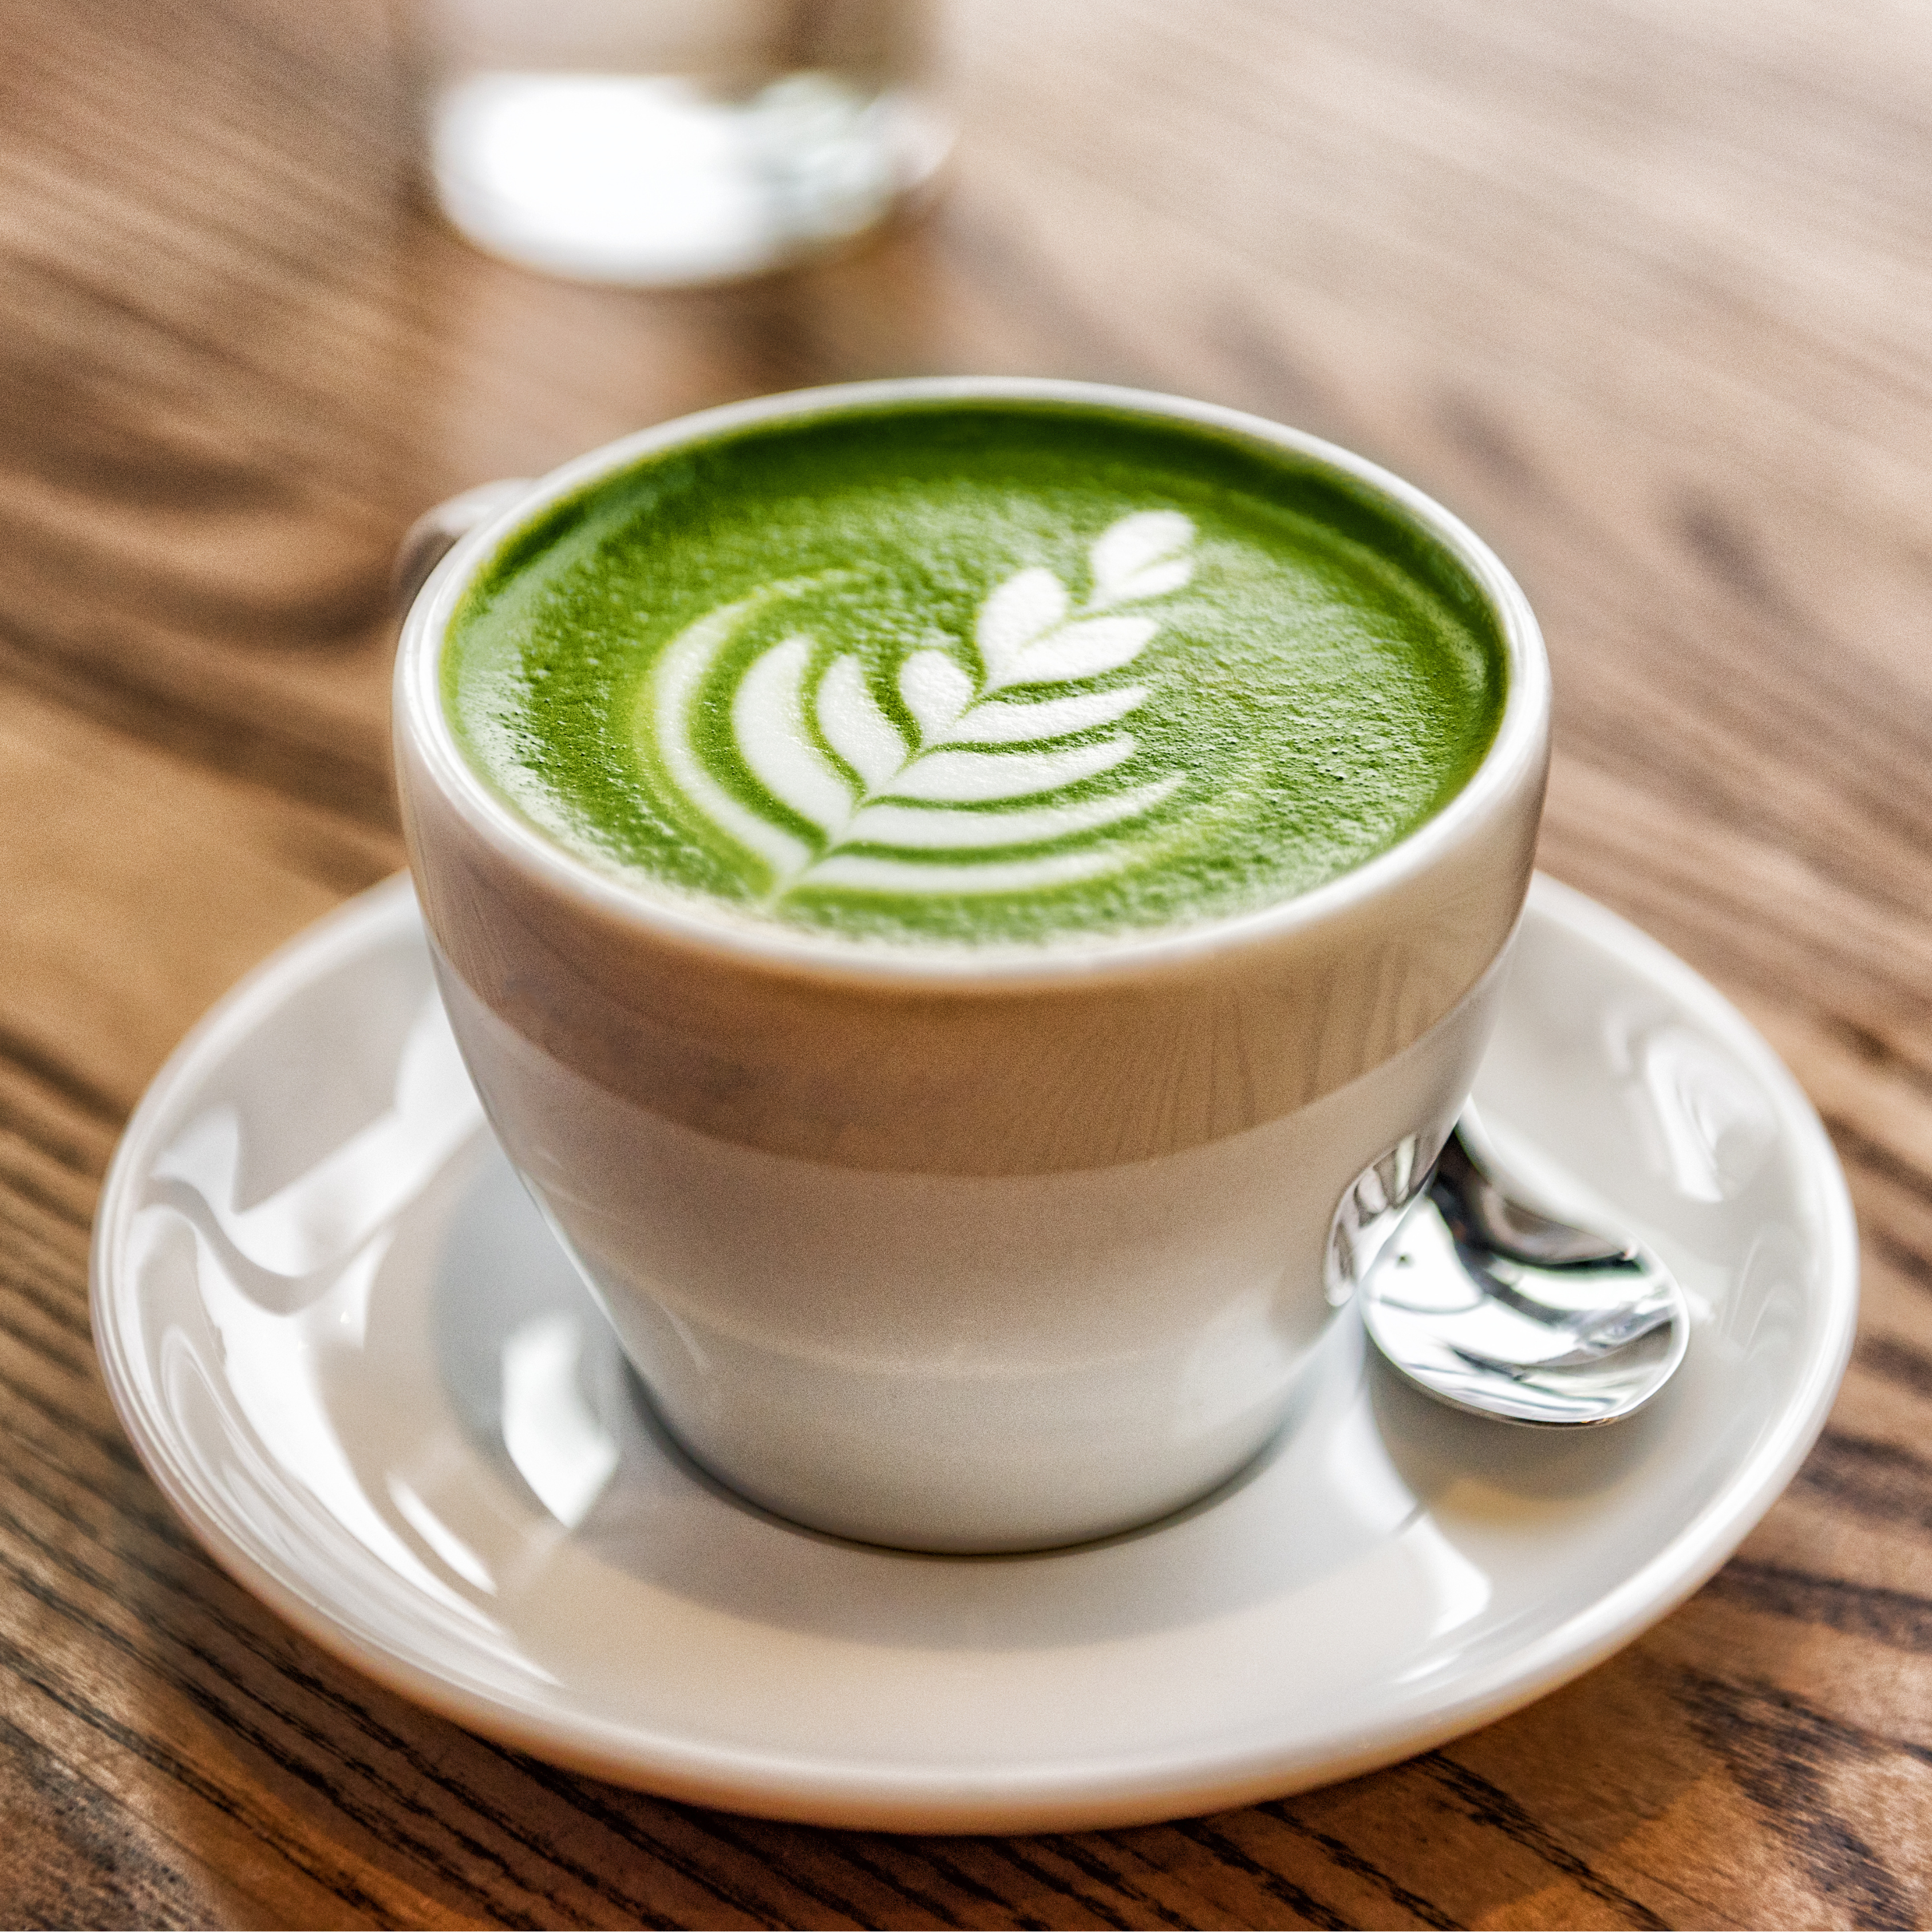 A green tea or coffee latte in a white ceramic mug on a wood table